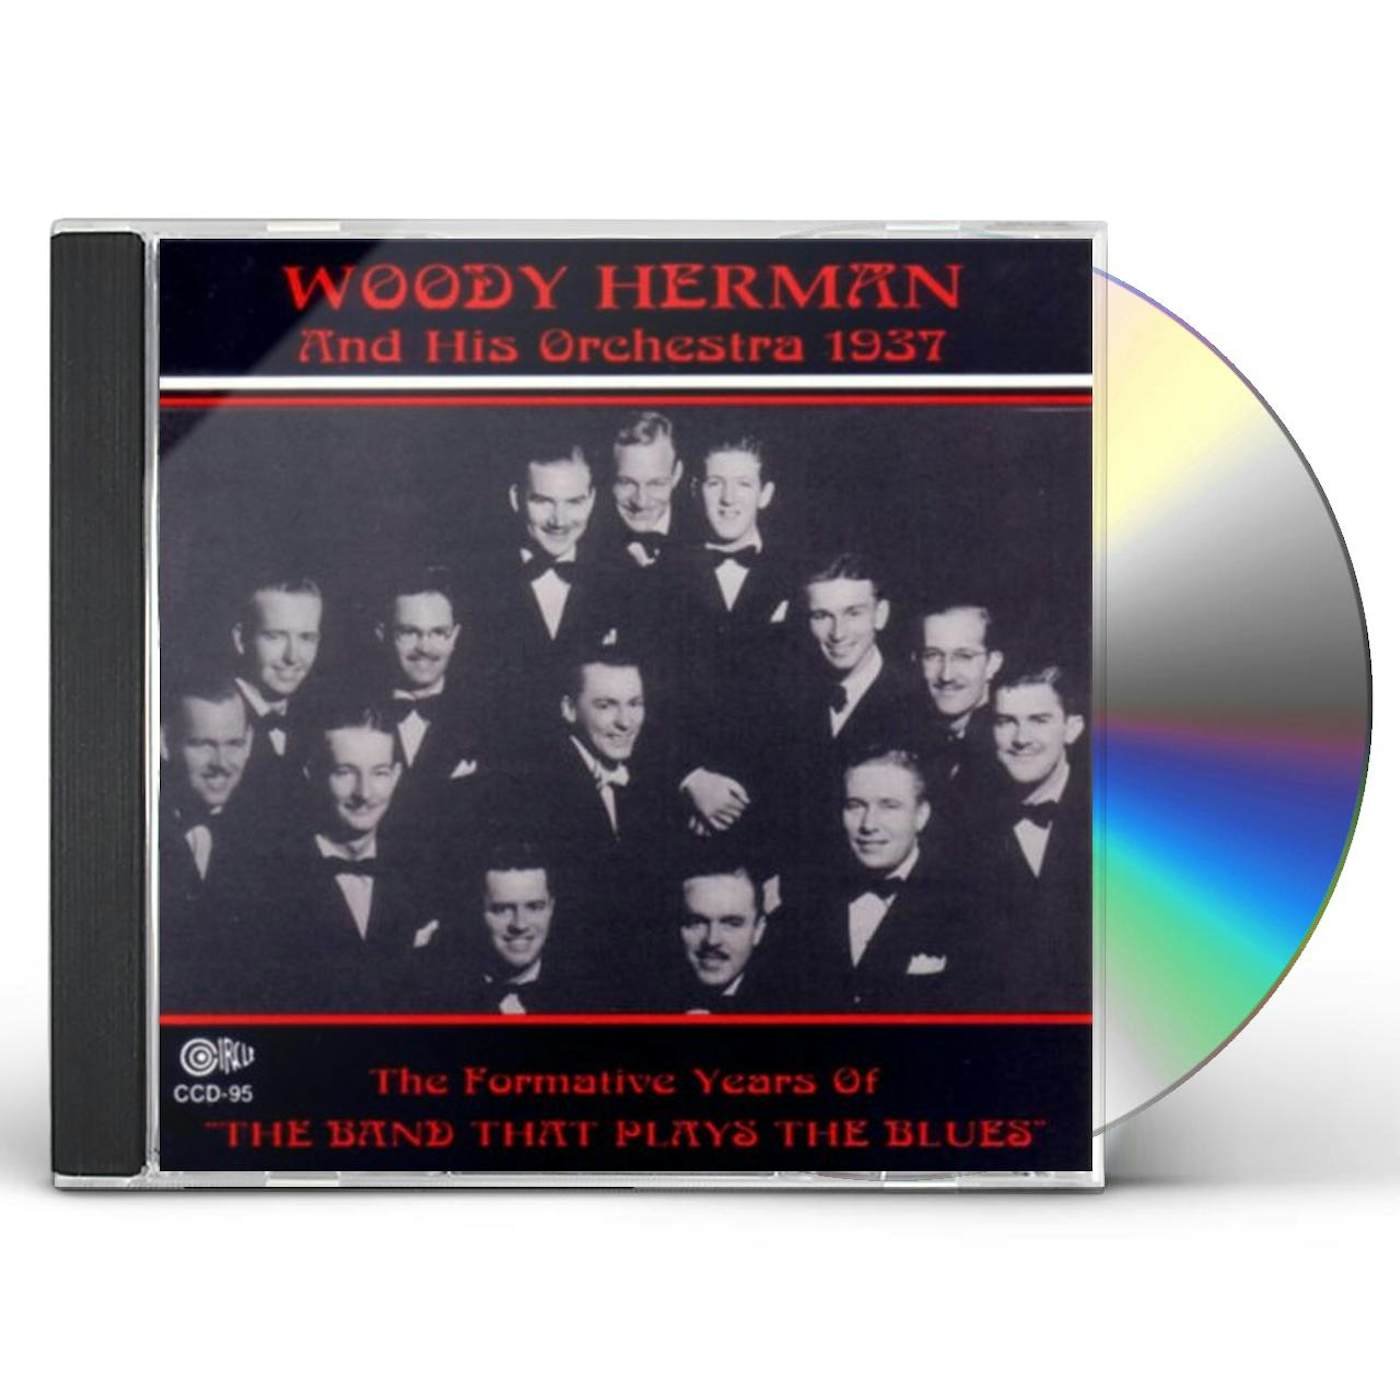 Woody Herman FORMATIVE YEARS OF THE BAND THAT PLAYS THE BLUES CD